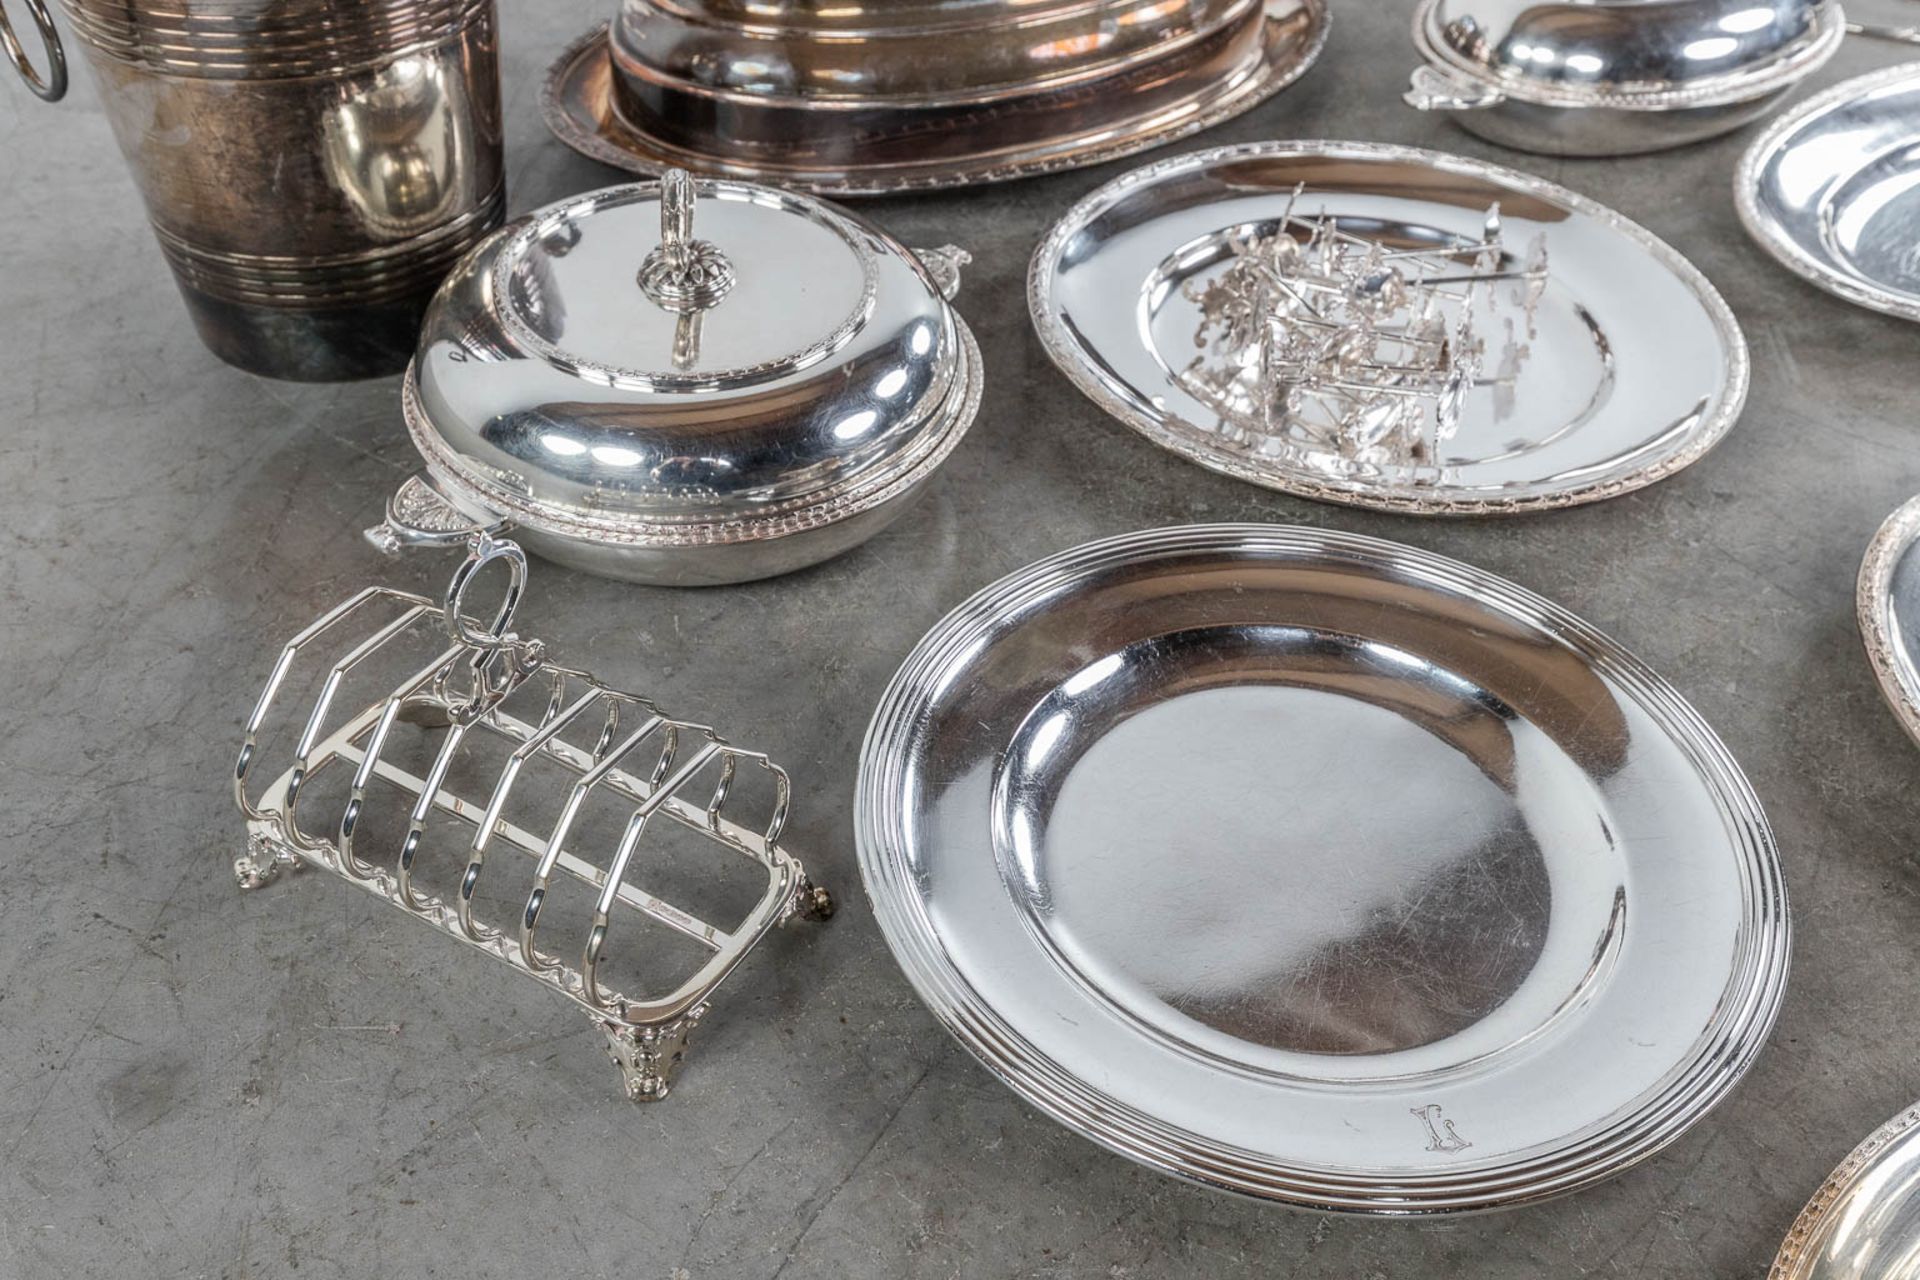 A large collection of table accessories and serving ware, silver-plated metal. (L: 32 x W: 48 cm) - Image 7 of 10